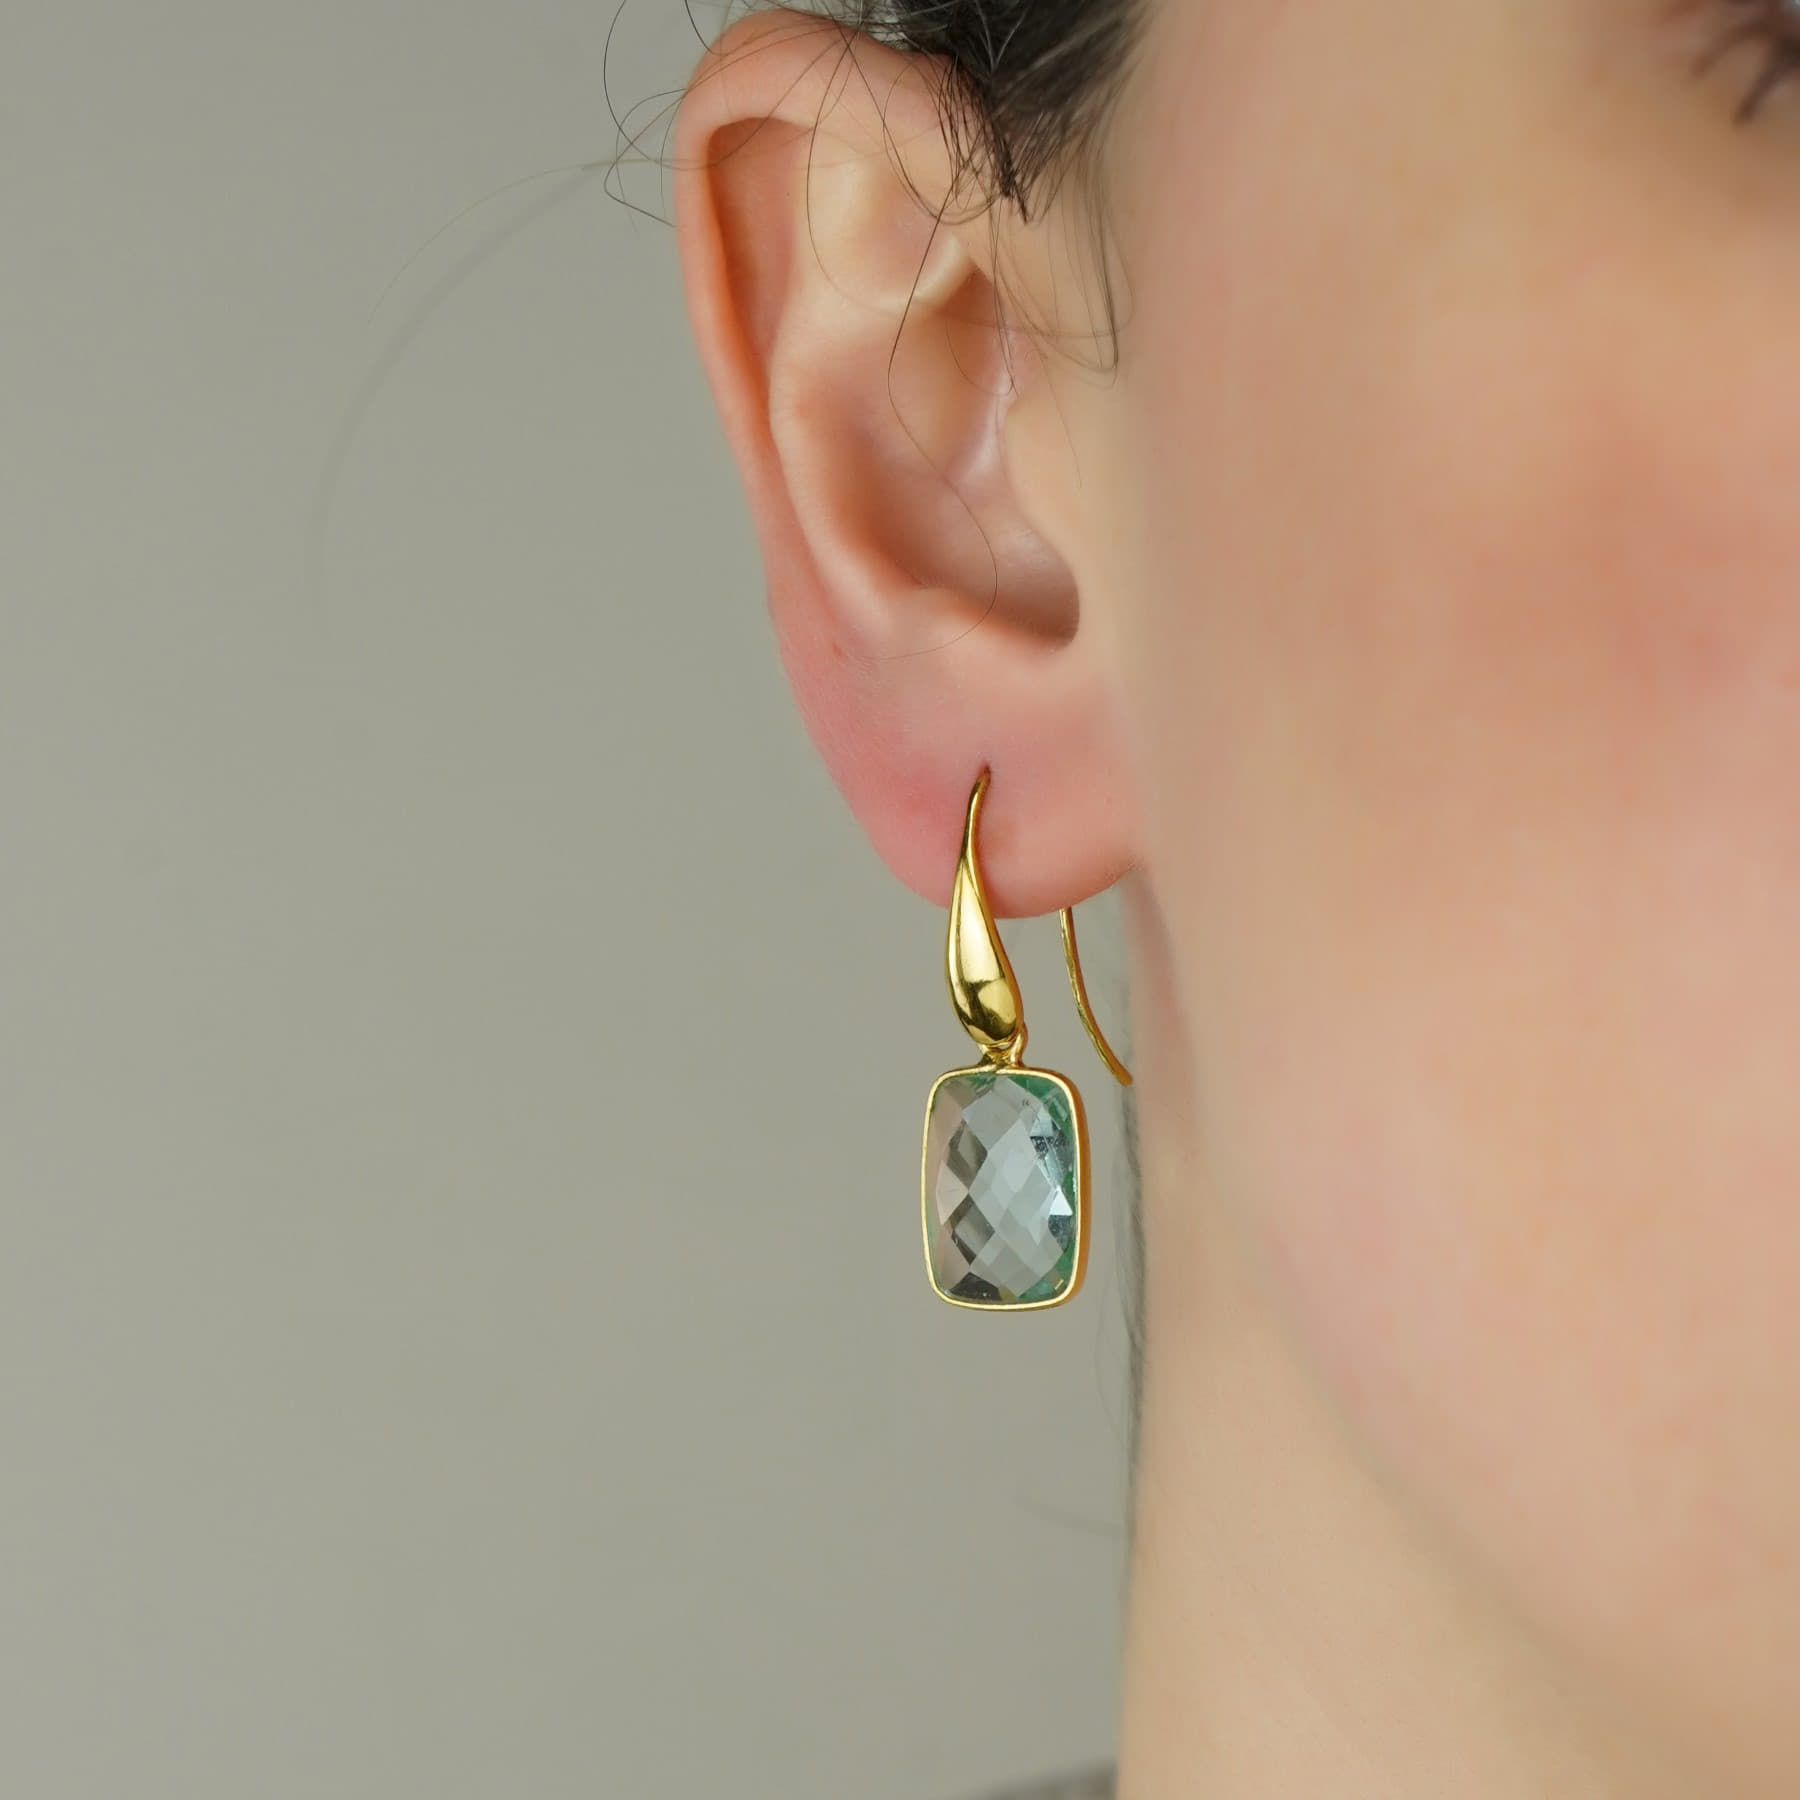 Earring silver 925 gold plated with light blue quartz - Gregio in Australia